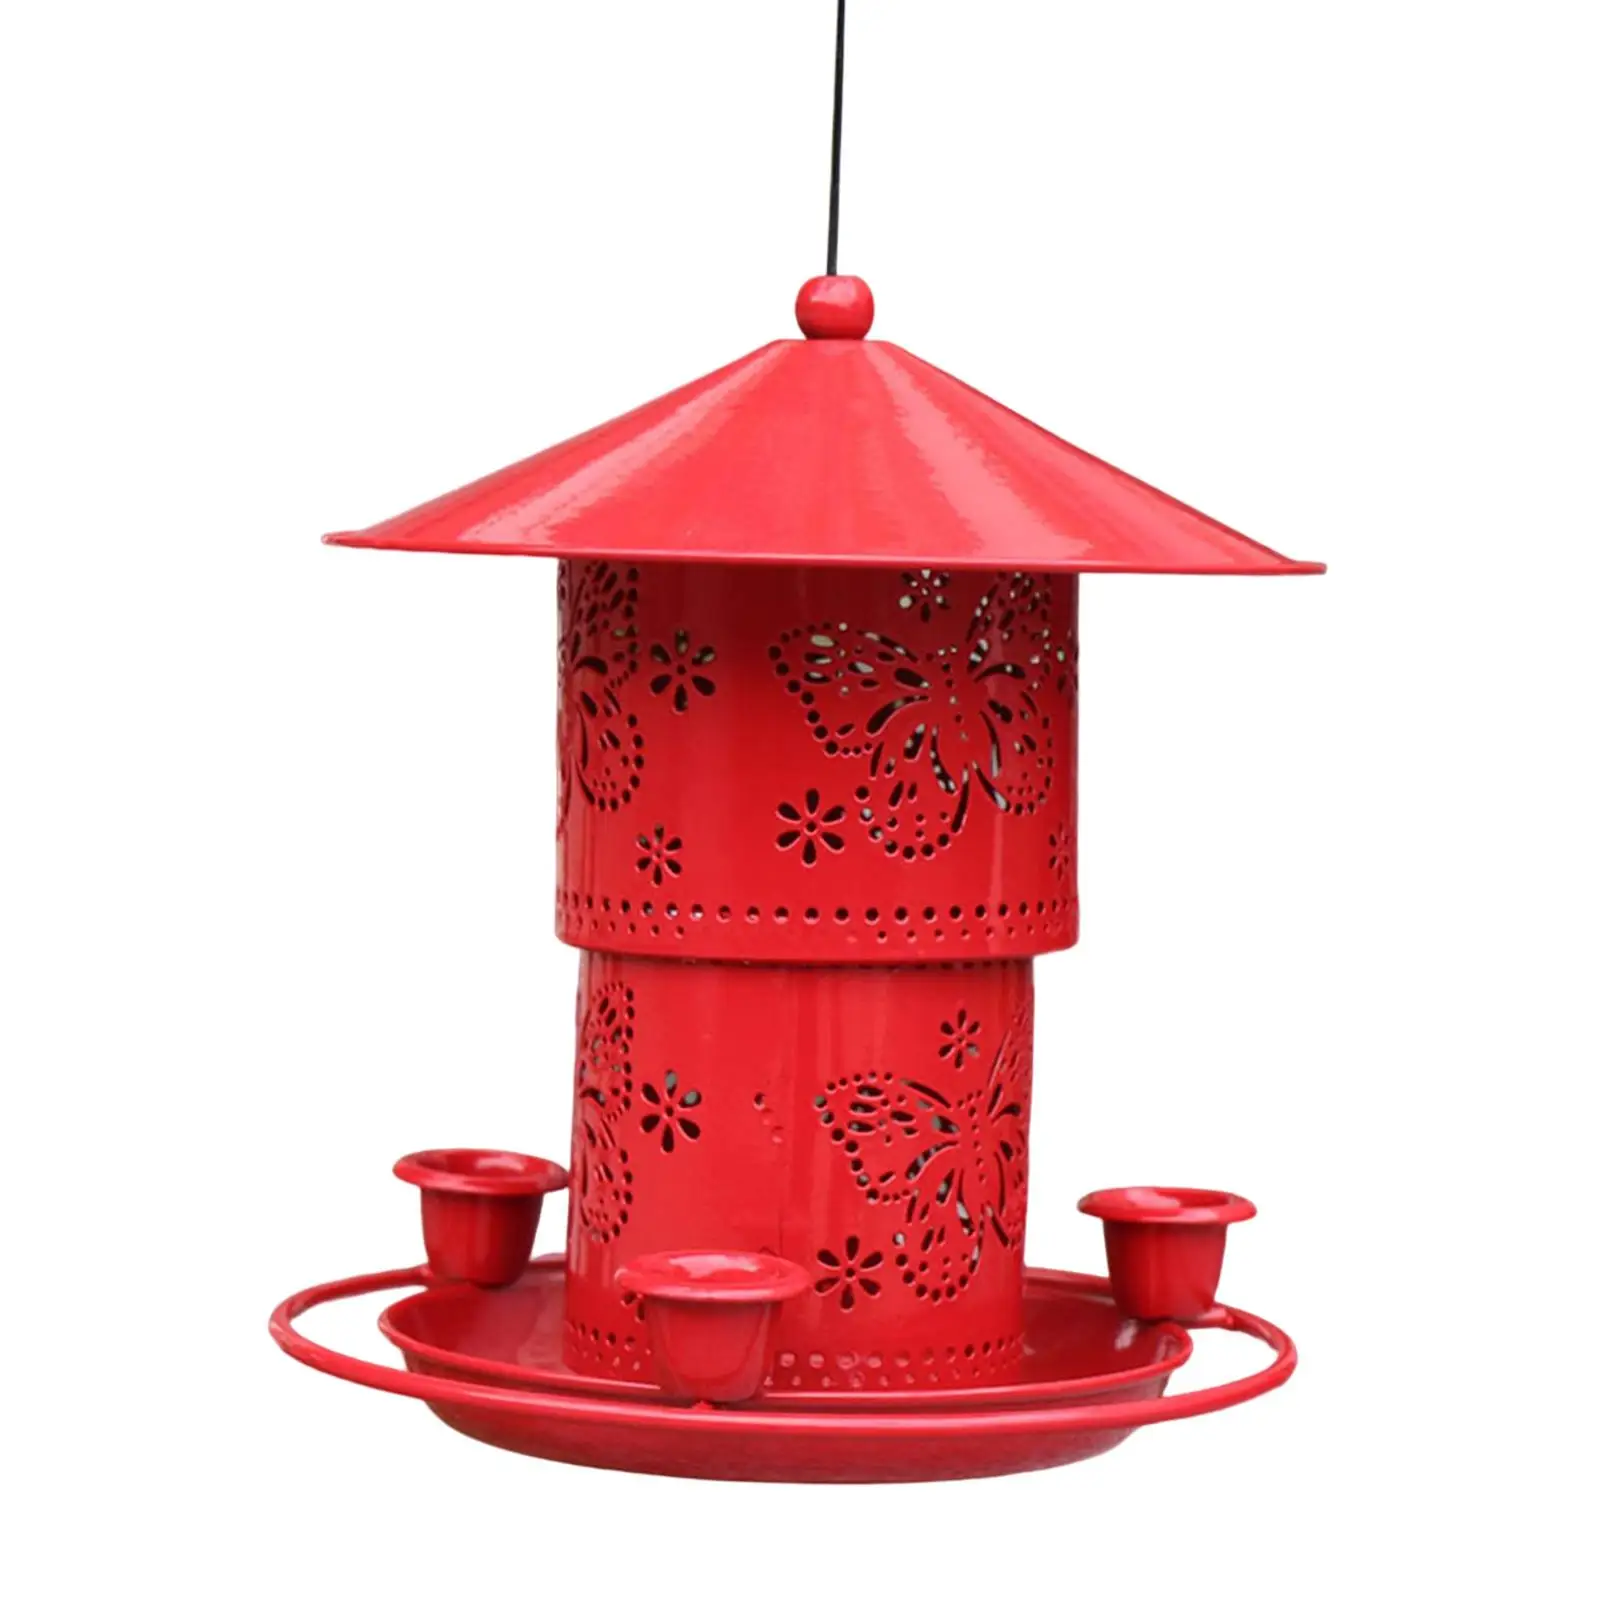 Hummingbird Feeder Easy to Clean 3 Feeder Ports for Trees Yard Small Birds